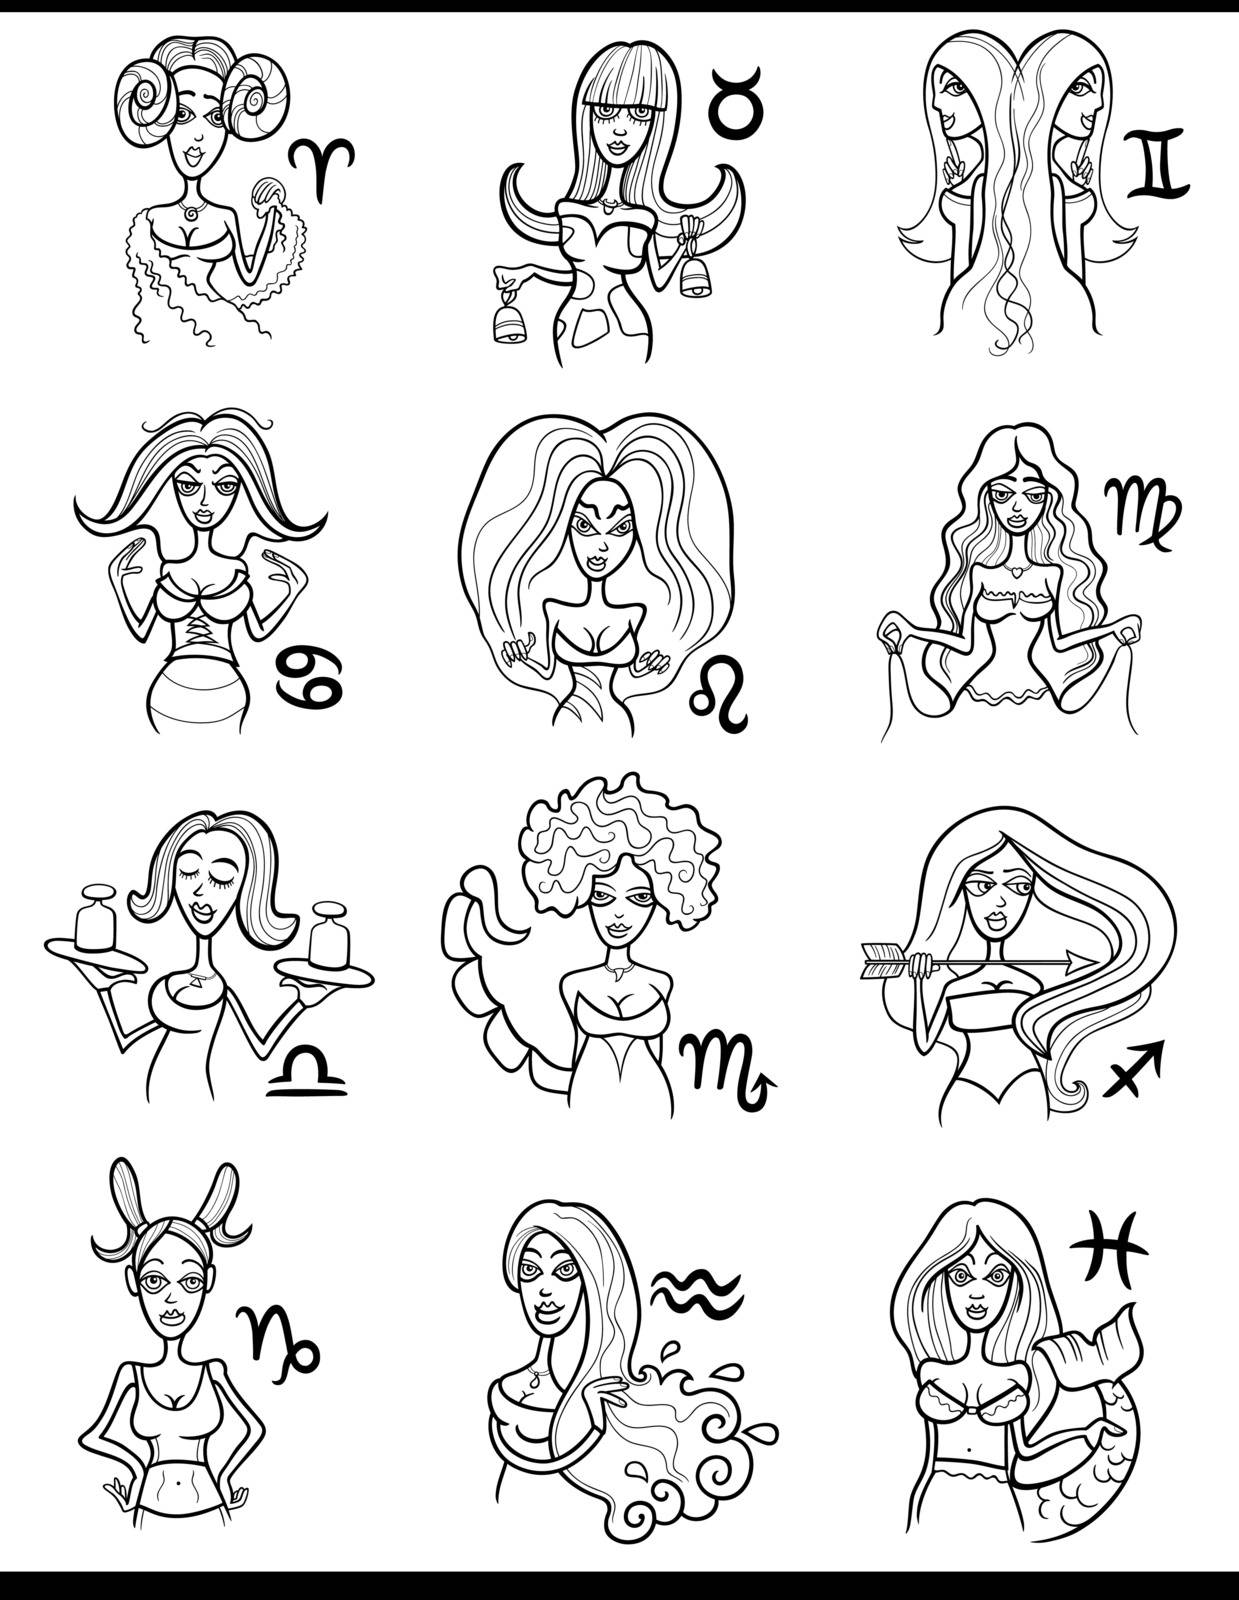 Cartoon Illustration of Black and White Horoscope Zodiac Signs with Beautiful Women